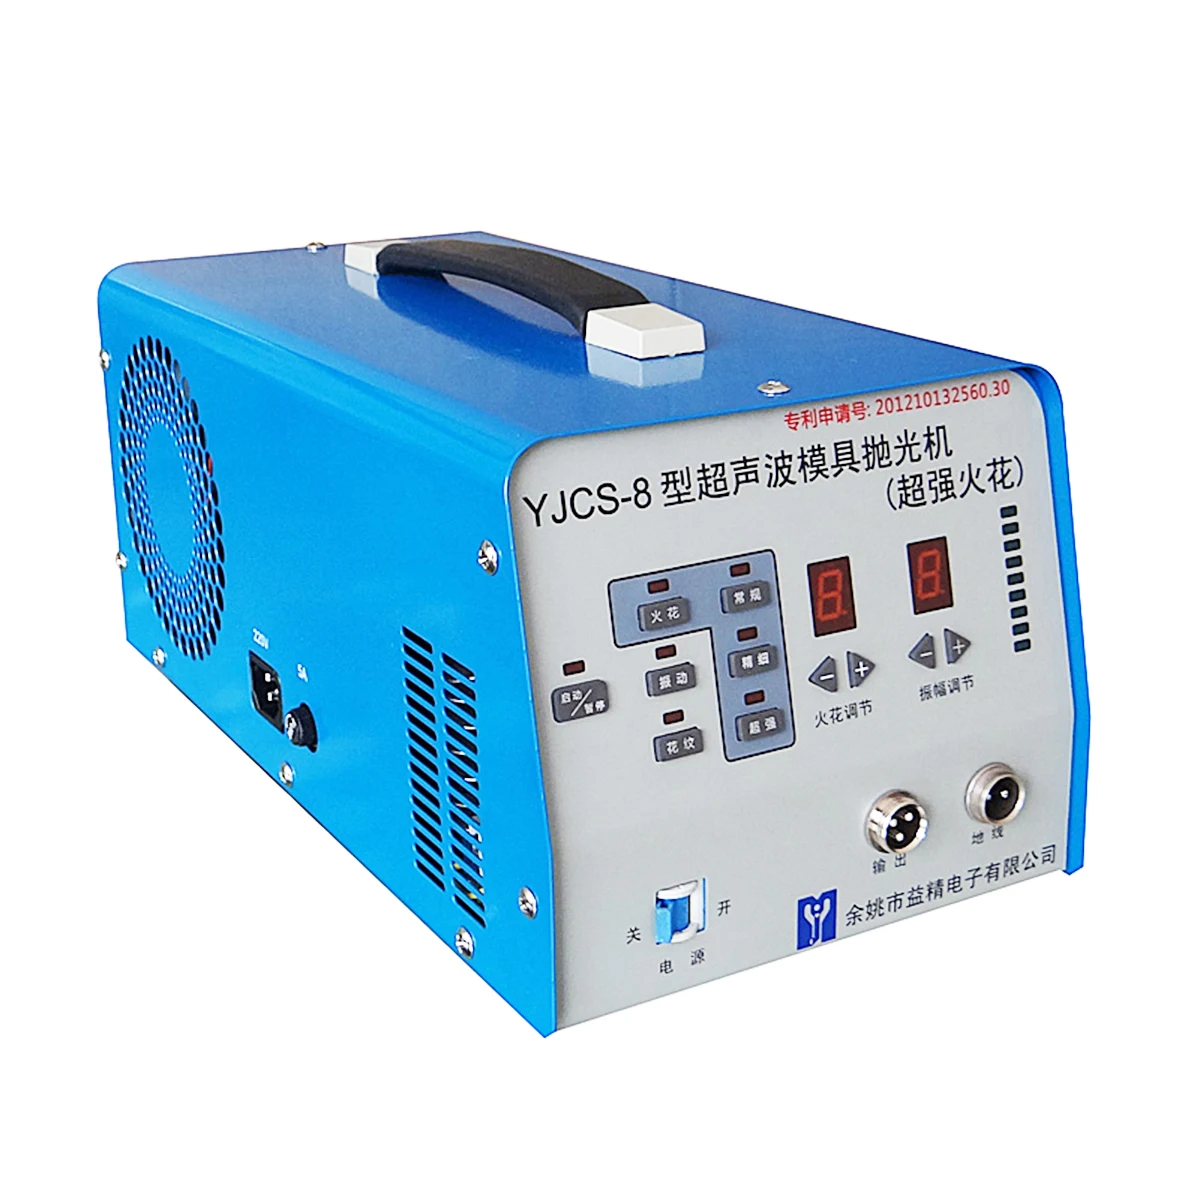 

YJCS-8 Multi-Functional Electric Ultrasonic Grinding Spark Machine used in Mold Processing Grinding and Polishing